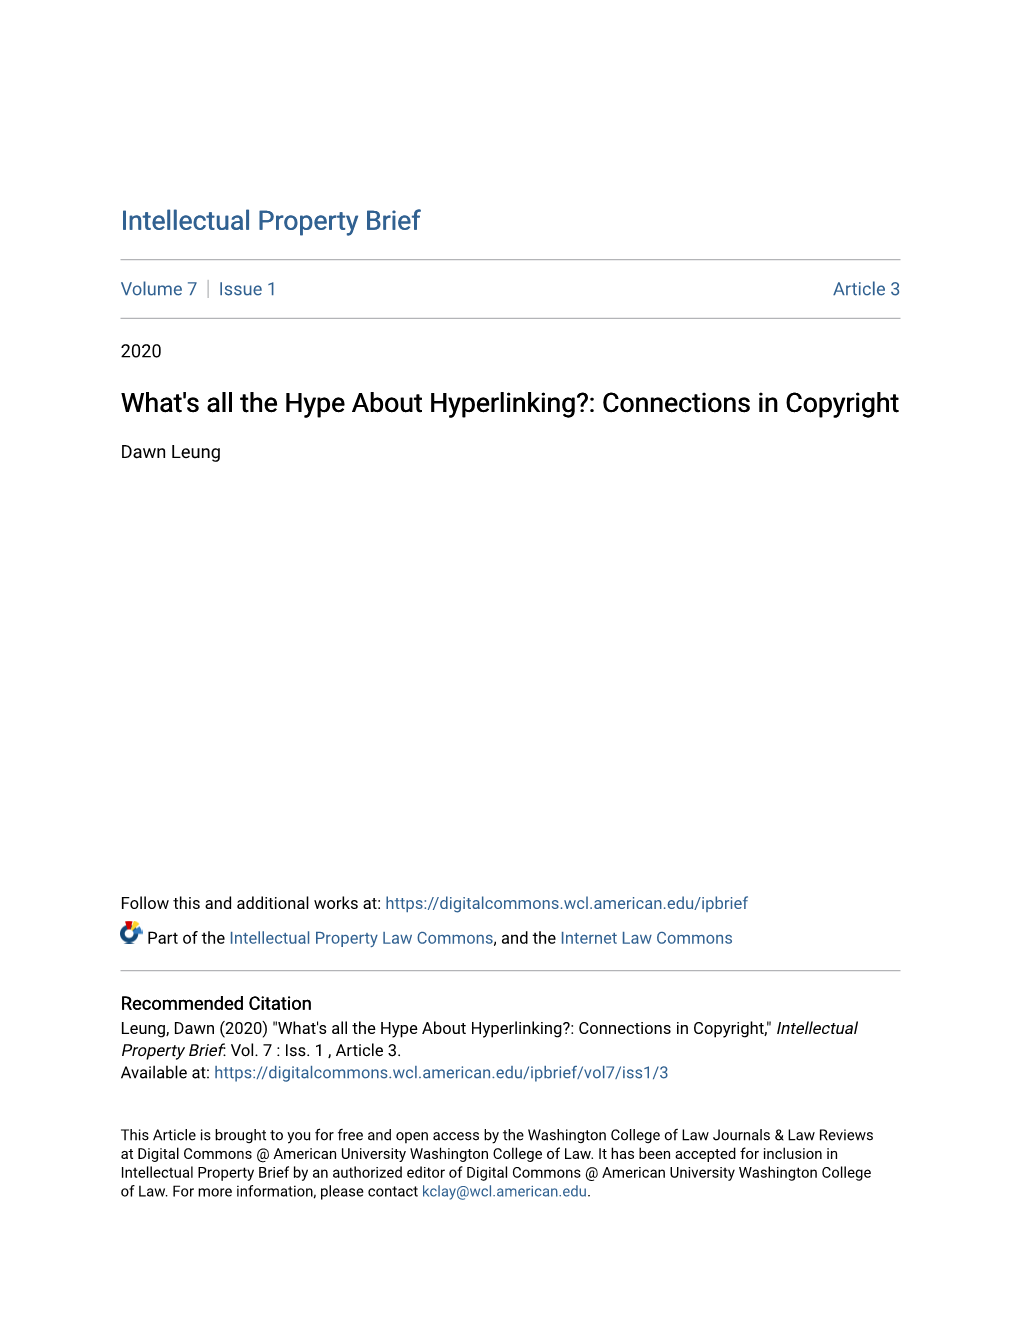 What's All the Hype About Hyperlinking?: Connections in Copyright